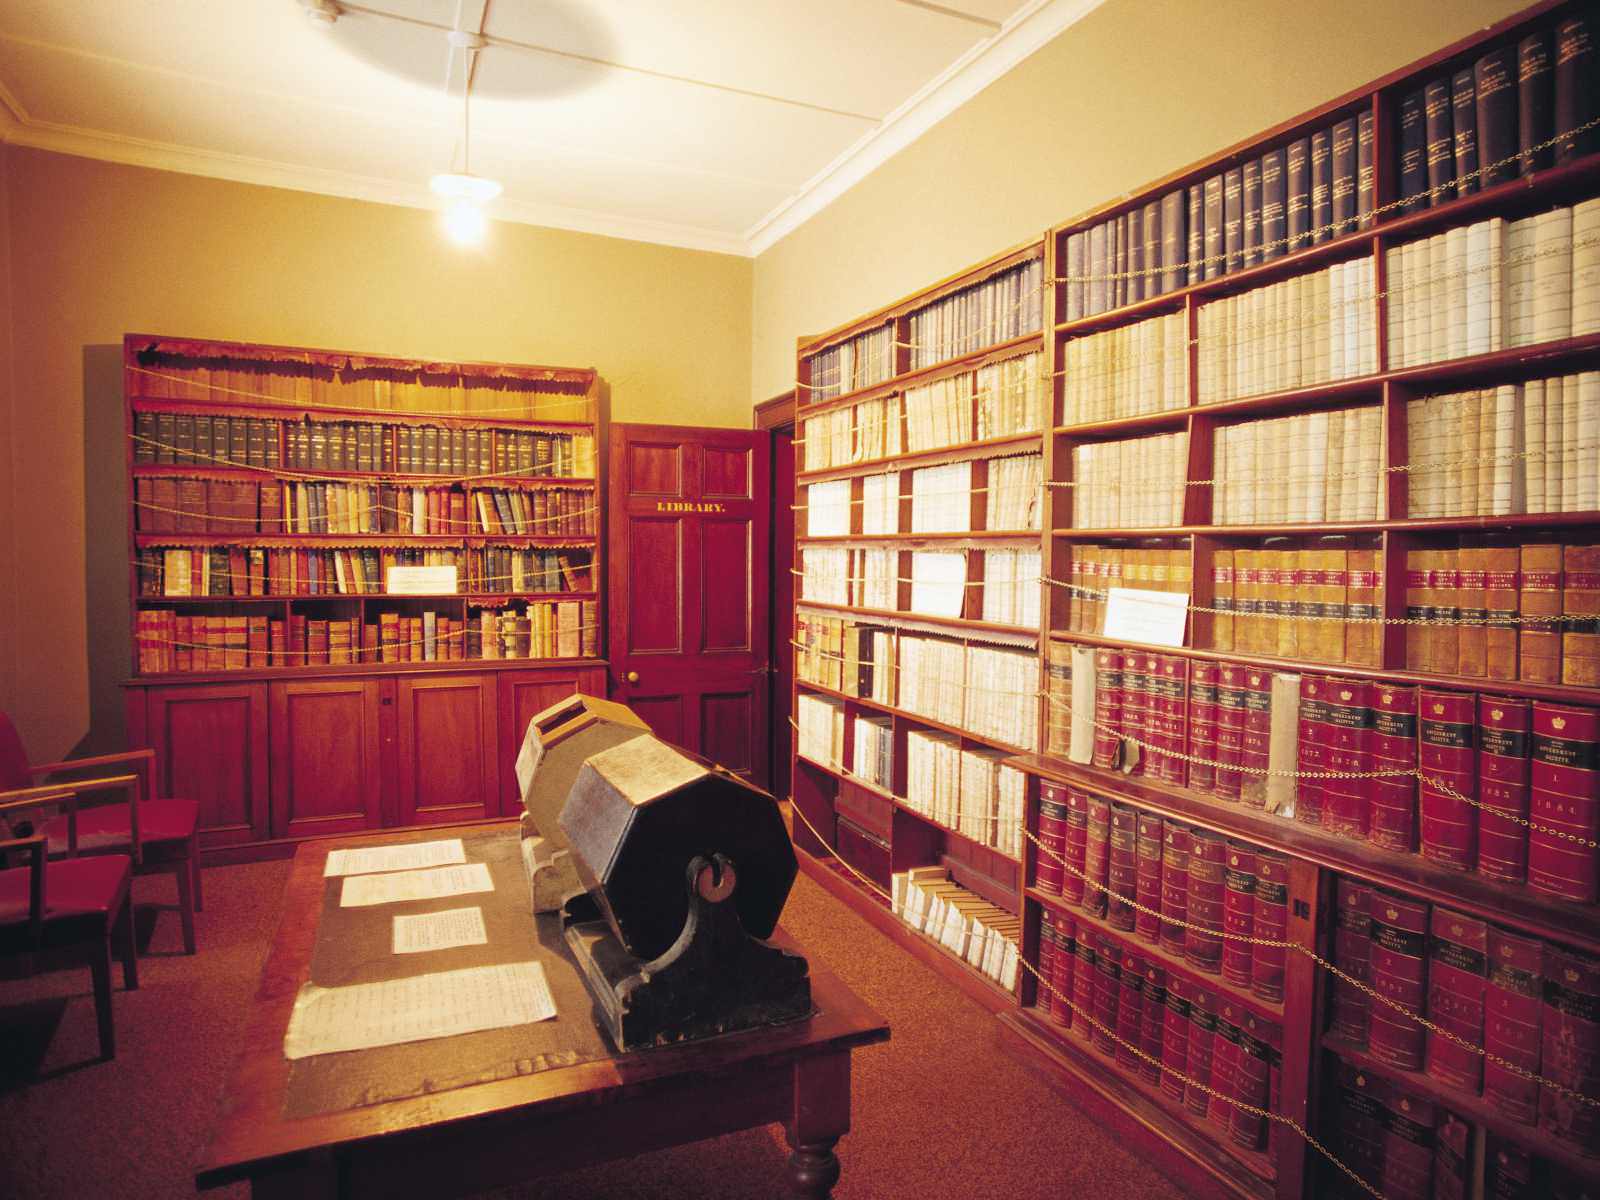 Court House office Beechworth. The room is red with books on the shelf